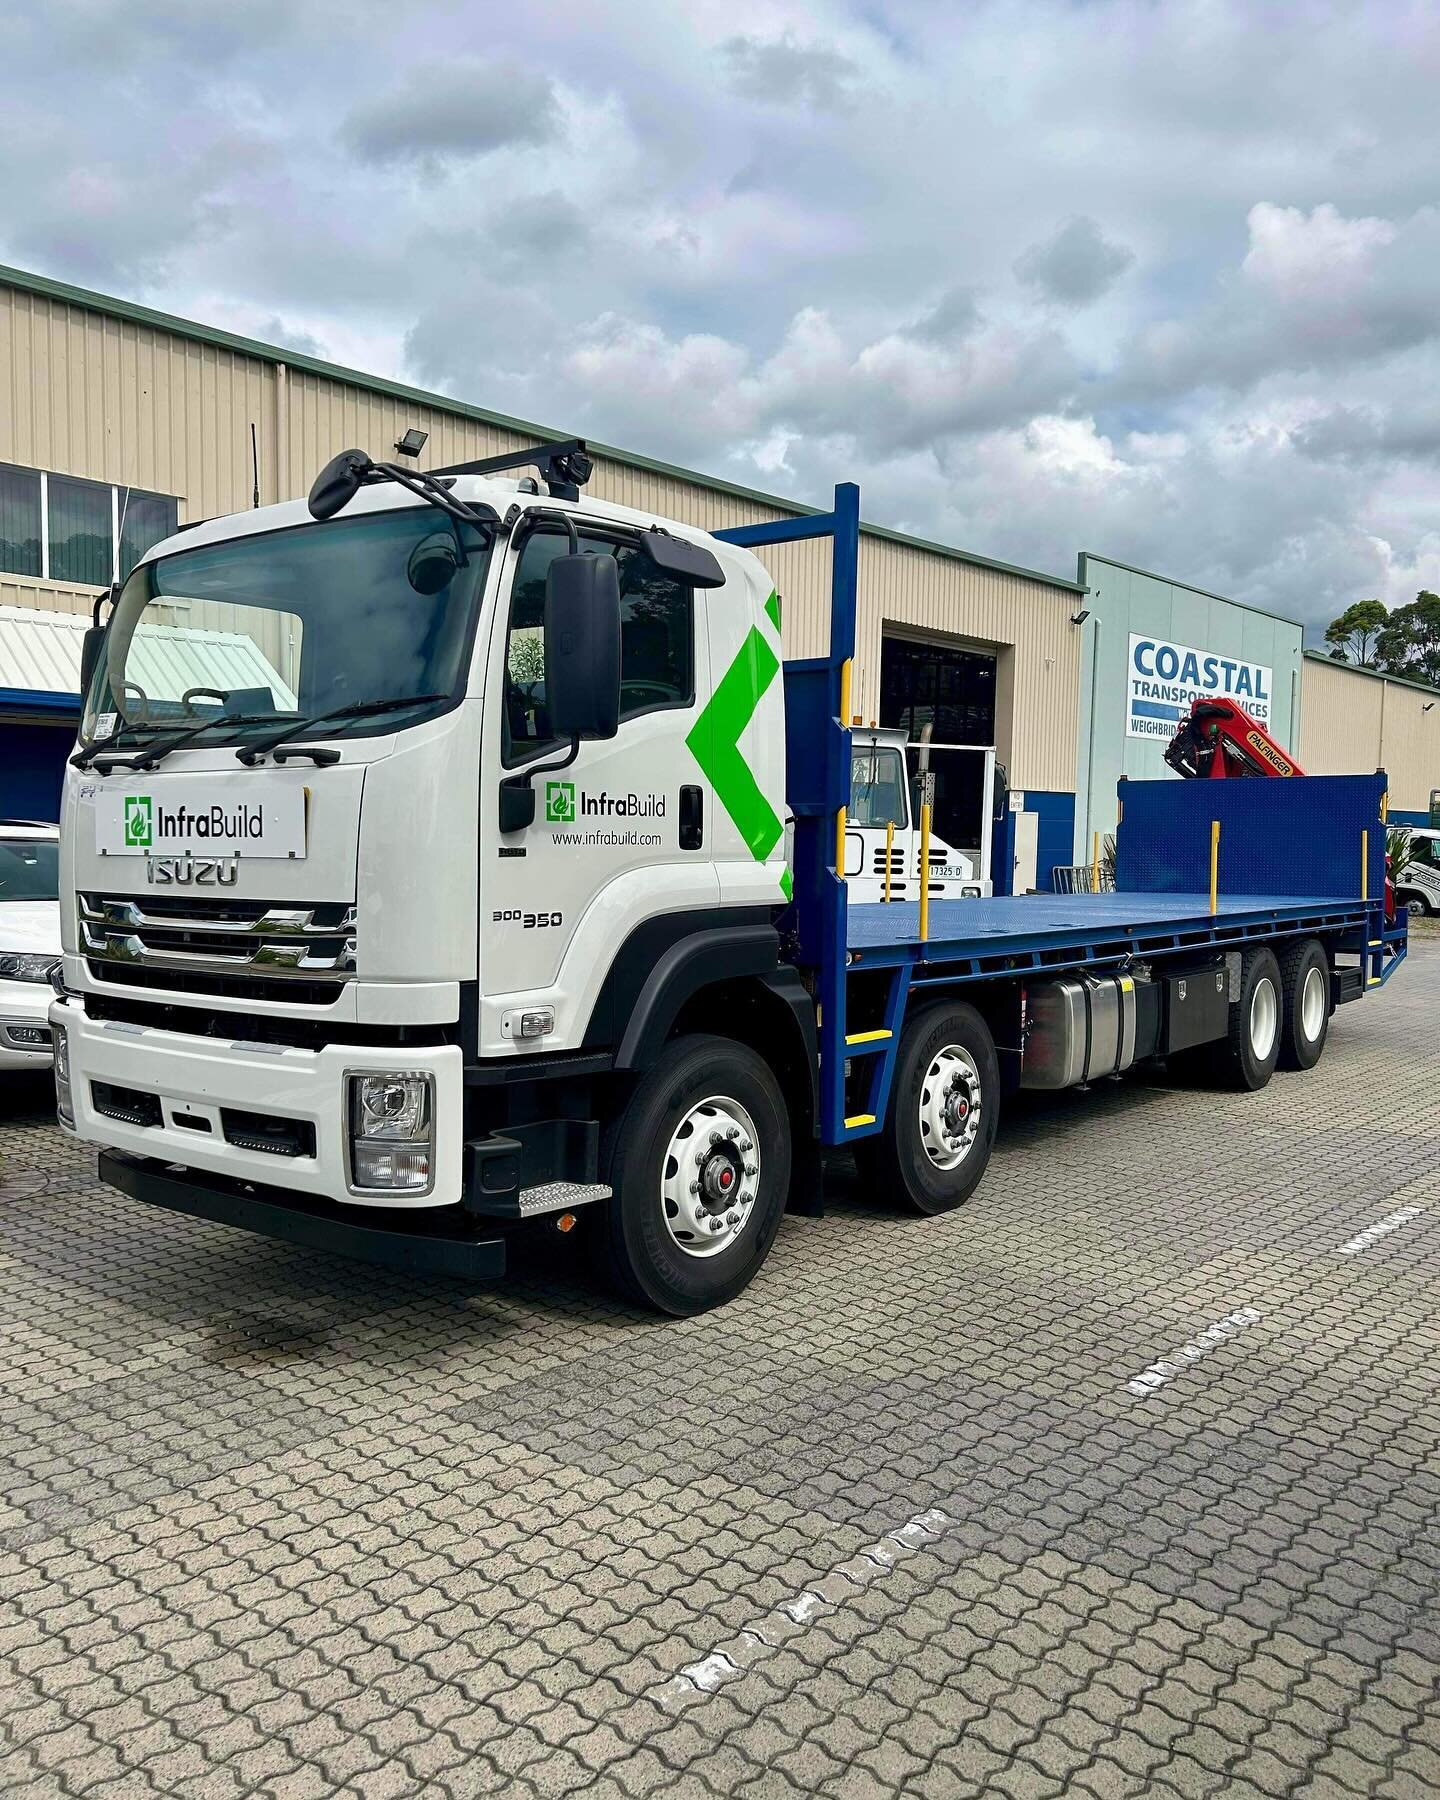 🚨NEW TRUCK🚨

Last week we took delivery of #2 of 4x new 8x4 Rigid&rsquo;s with rear mount Palfinger Australia crane!

This beauty will be out about delivering across the ACT further increasing our services across NSW and beyond!

#CTS 🔵⚪️💪